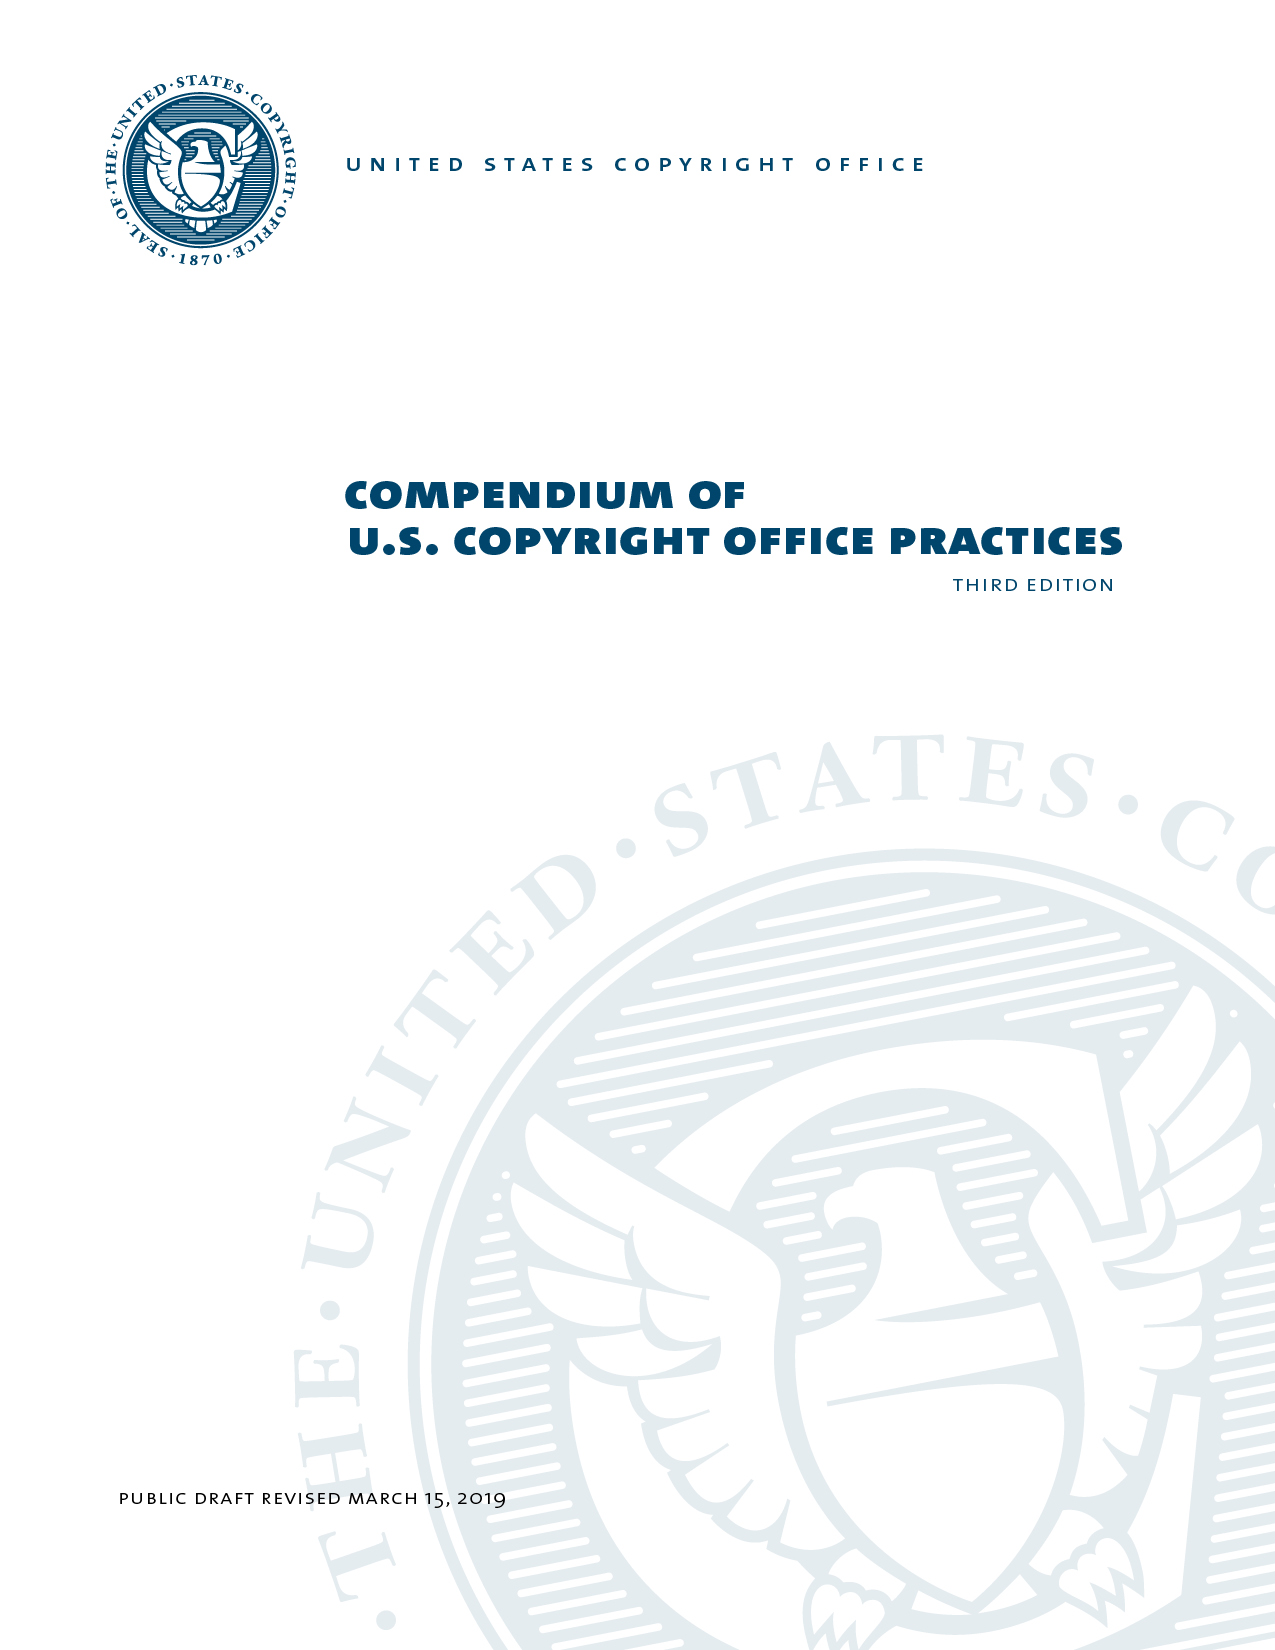 Public Draft of the Compendium of U.S. Copyright Office Practices, Third Edition Cover Page